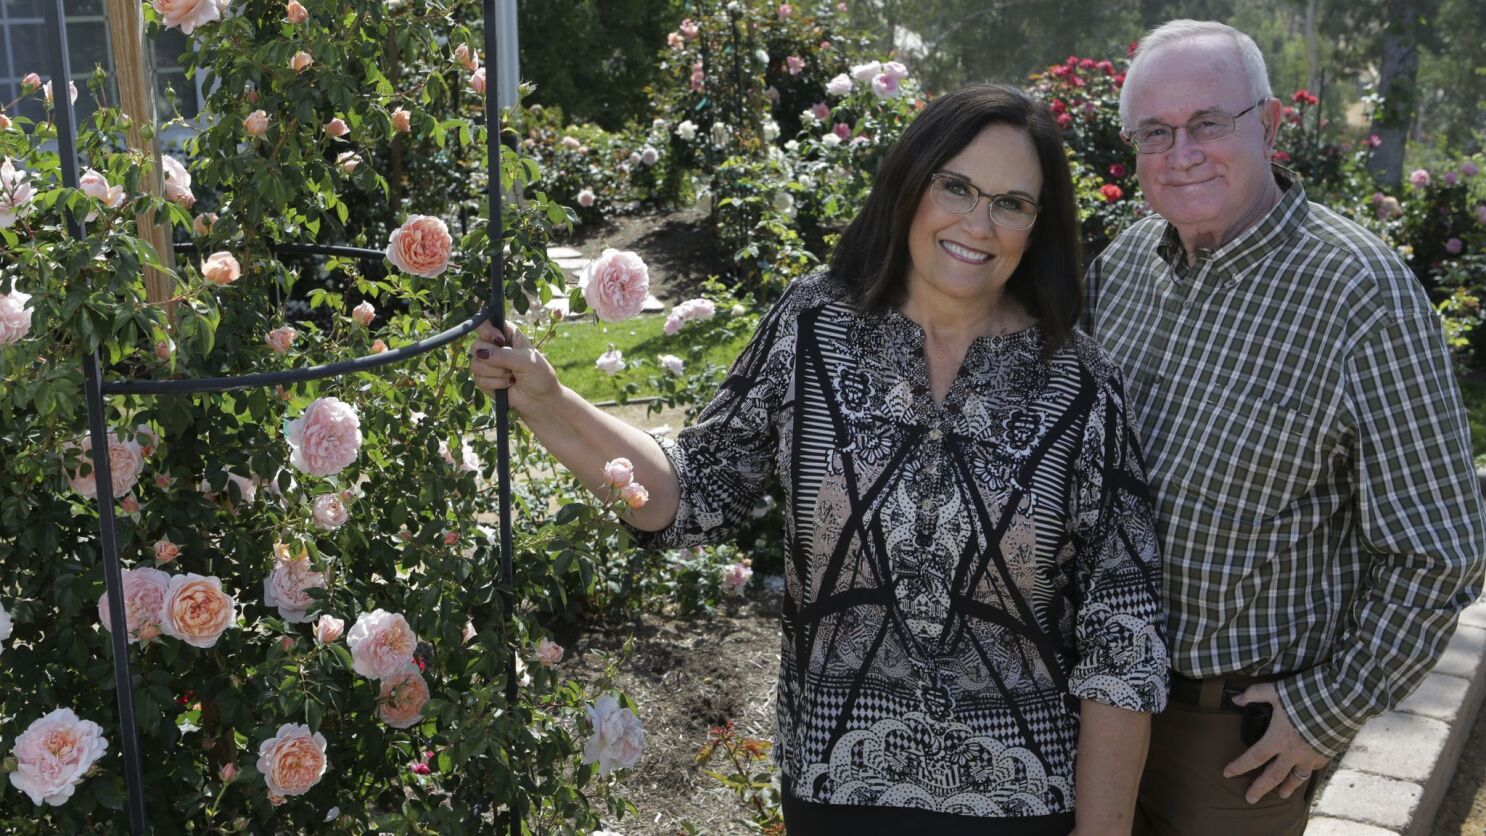 Escondido Couple Lead Legions Of Rose Lovers The San Diego Union